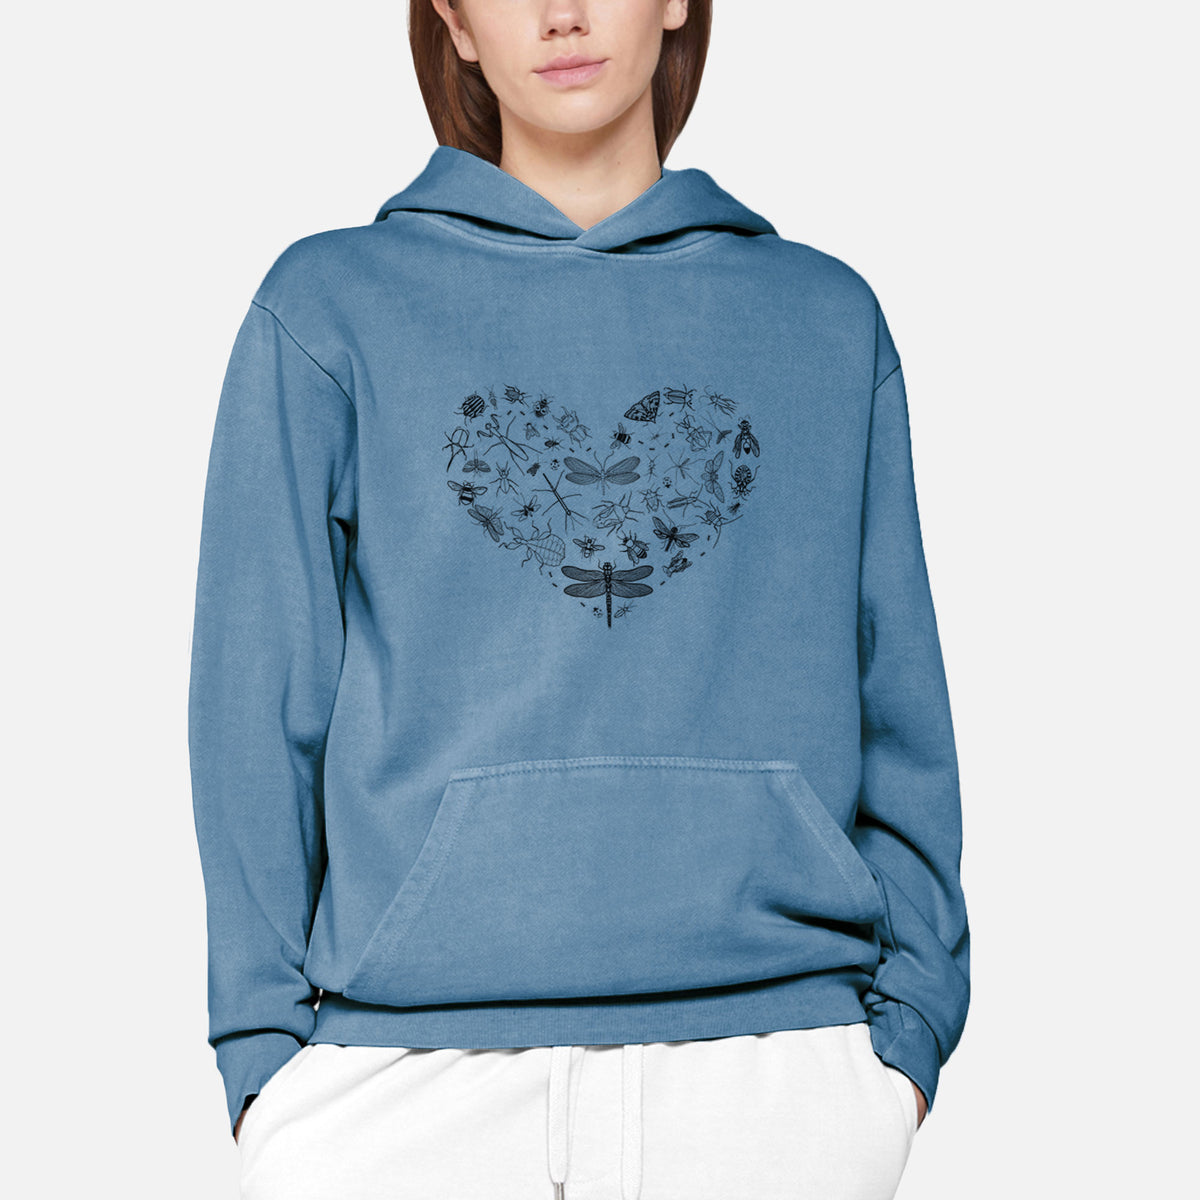 Heart Full of Insects  - Urban Heavyweight Hoodie